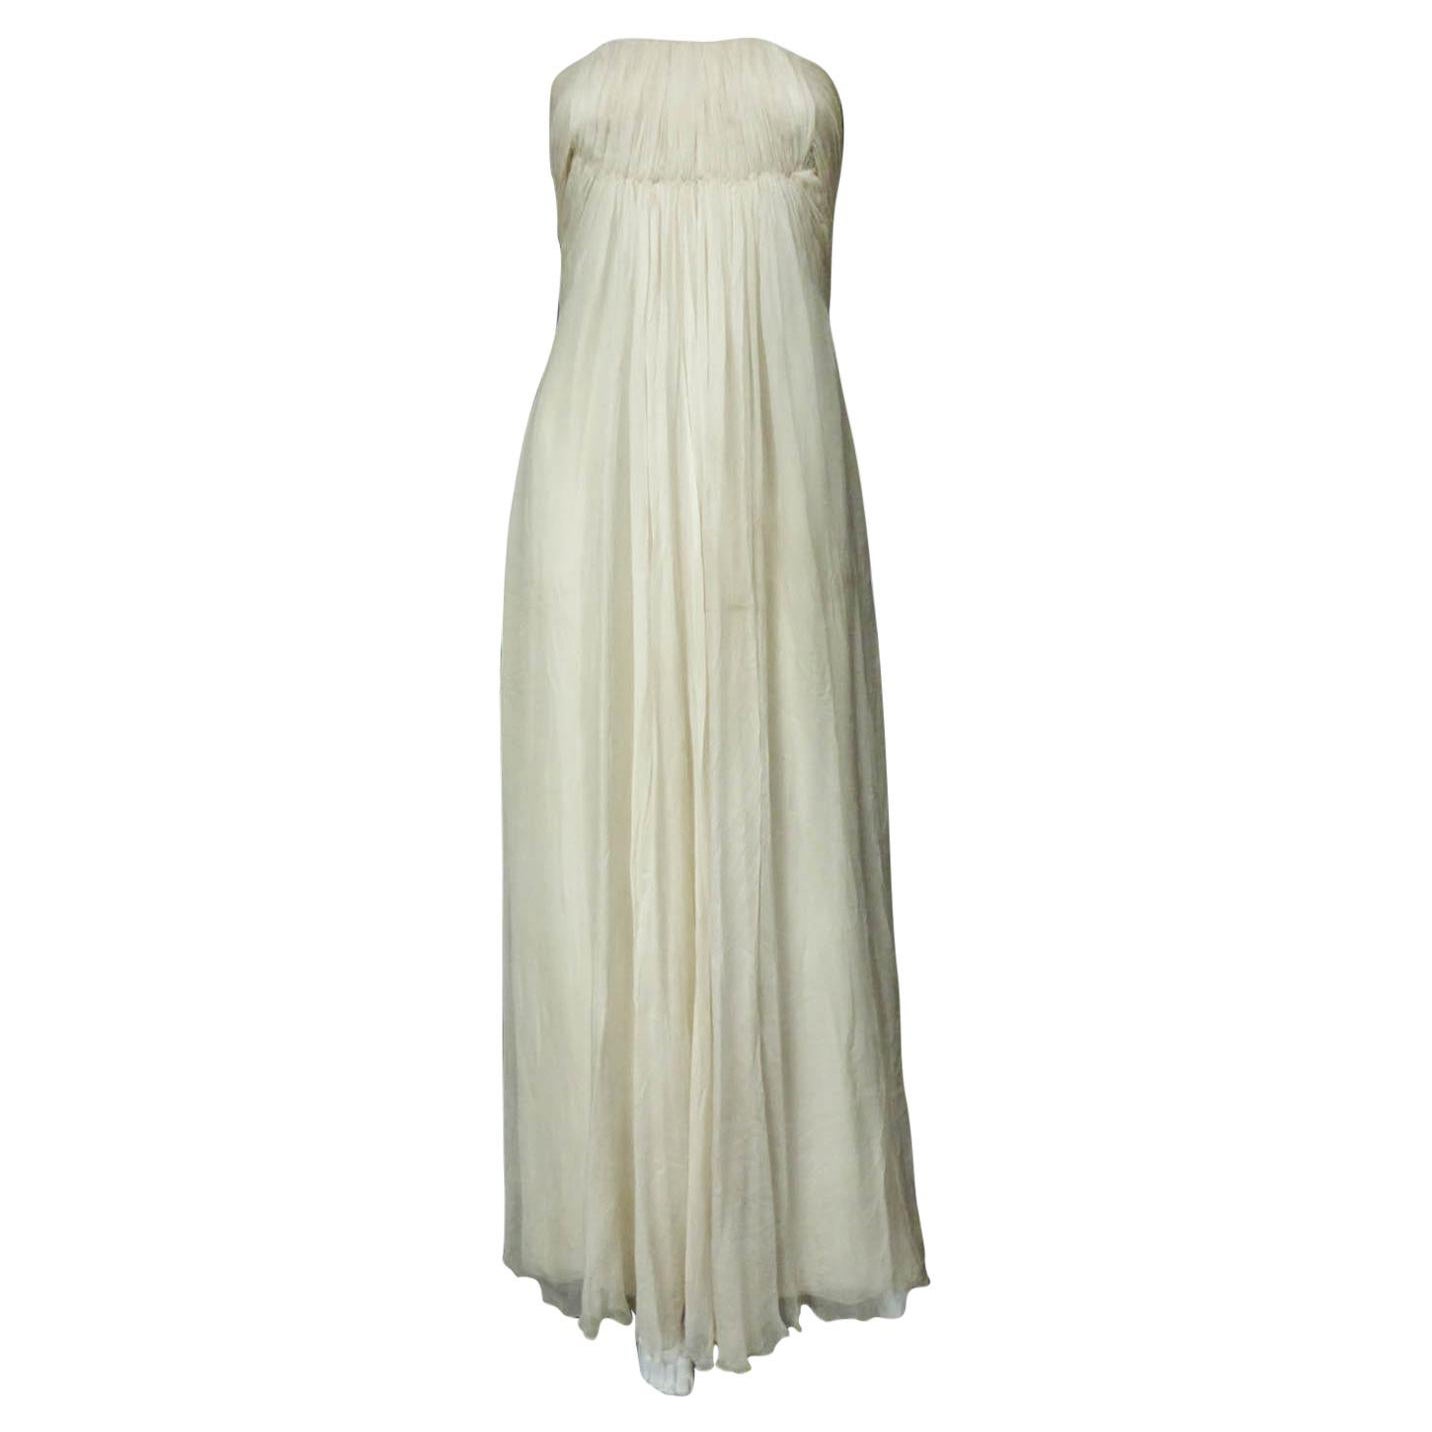 A French Couture Chiffon Cream Evening Dress Circa 1970 For Sale